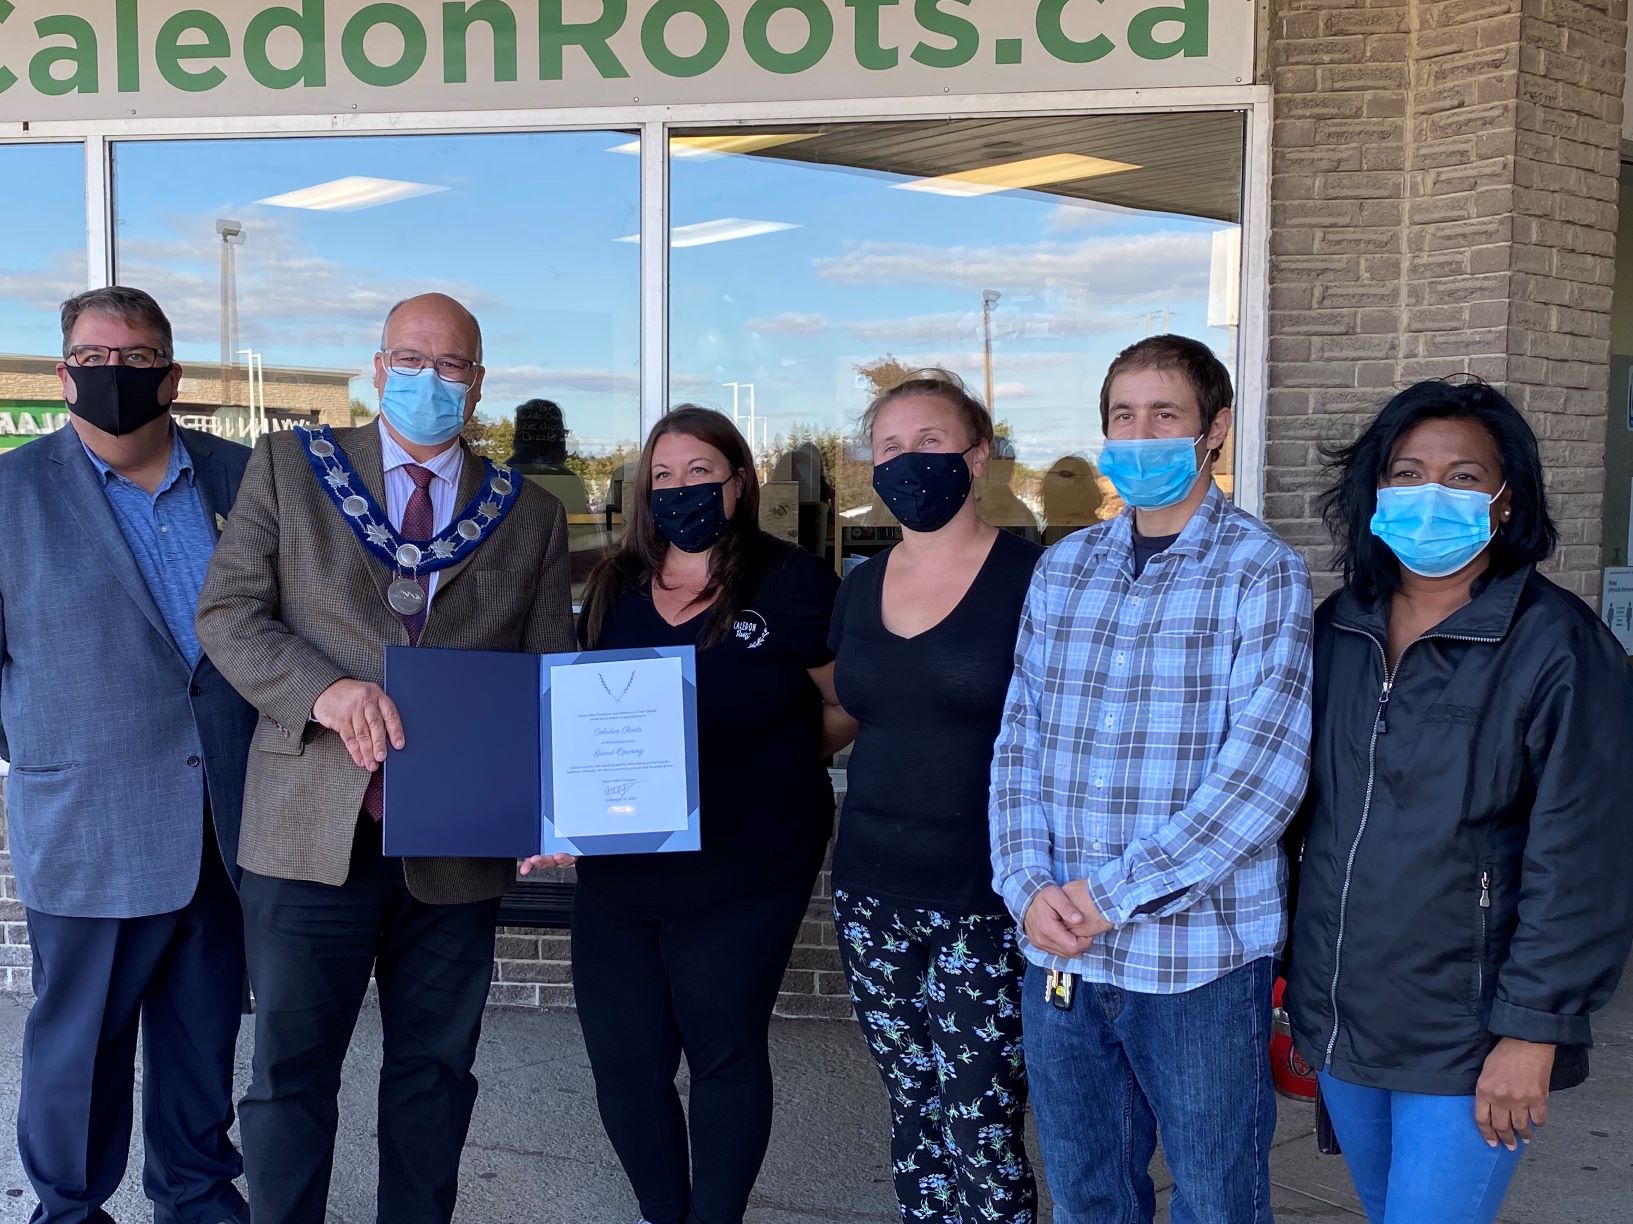 Caledon Roots grand opening